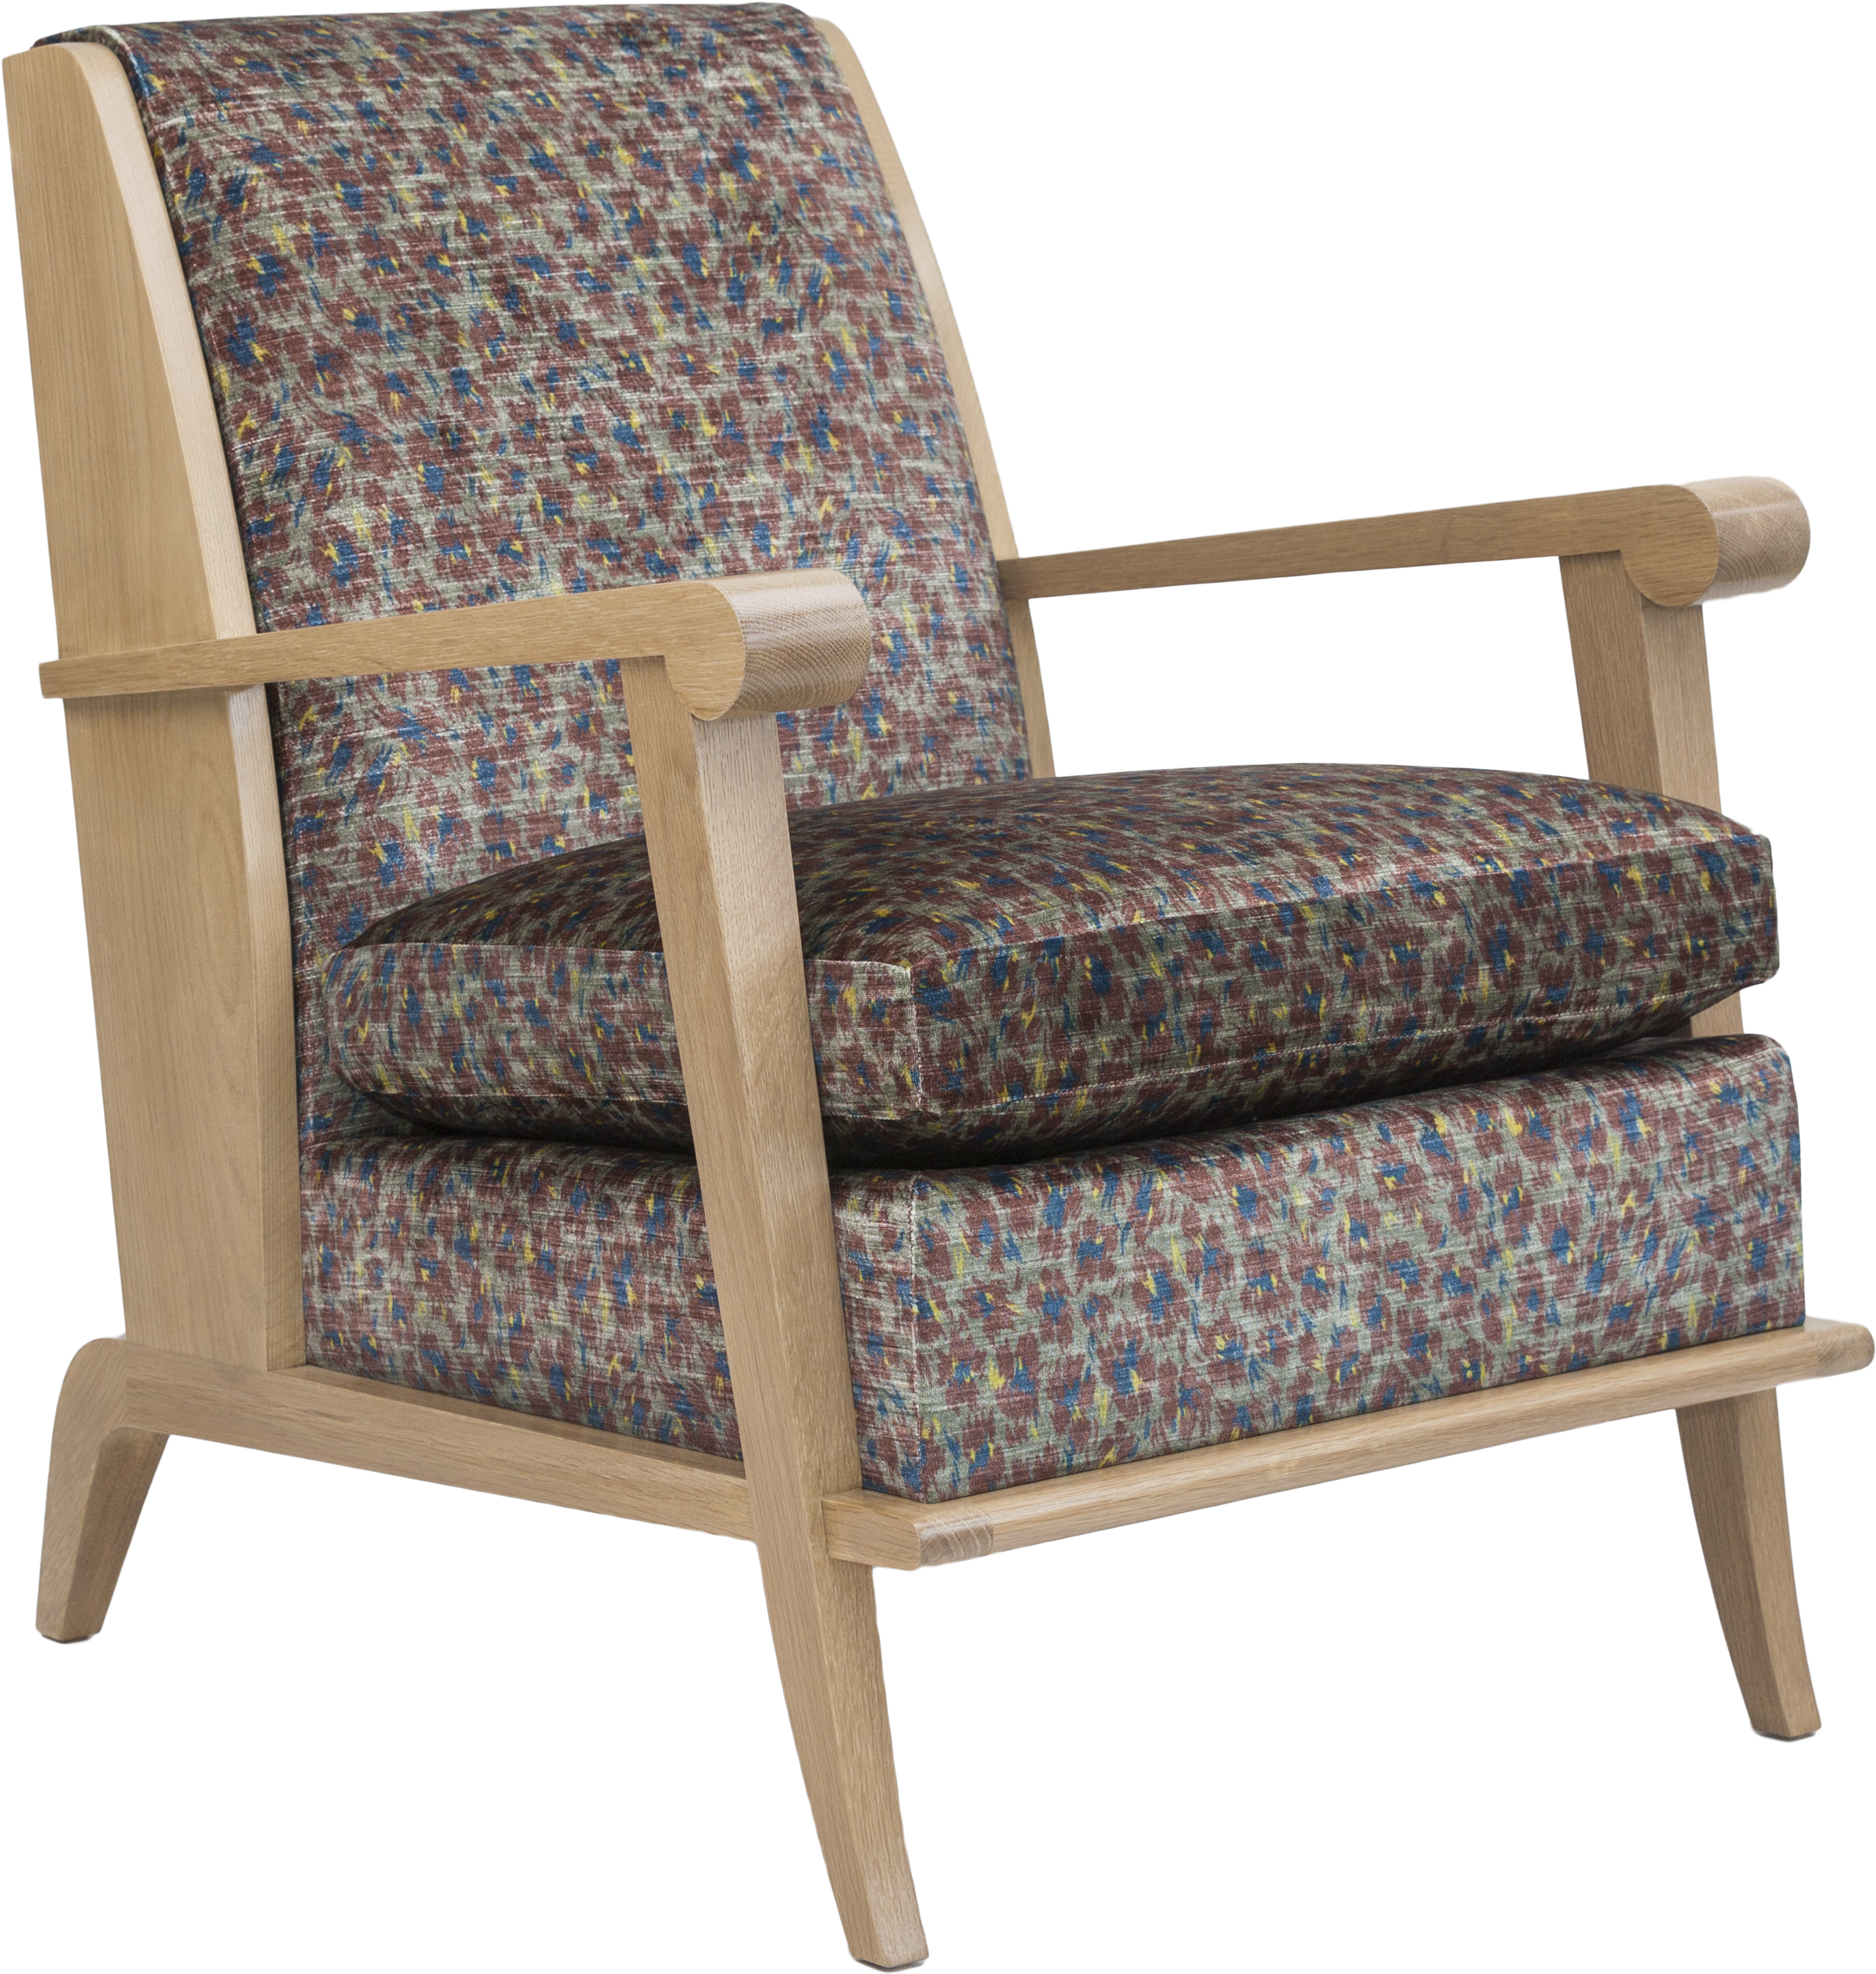 Modern Club Chair With Patterned Upholstery PNG image